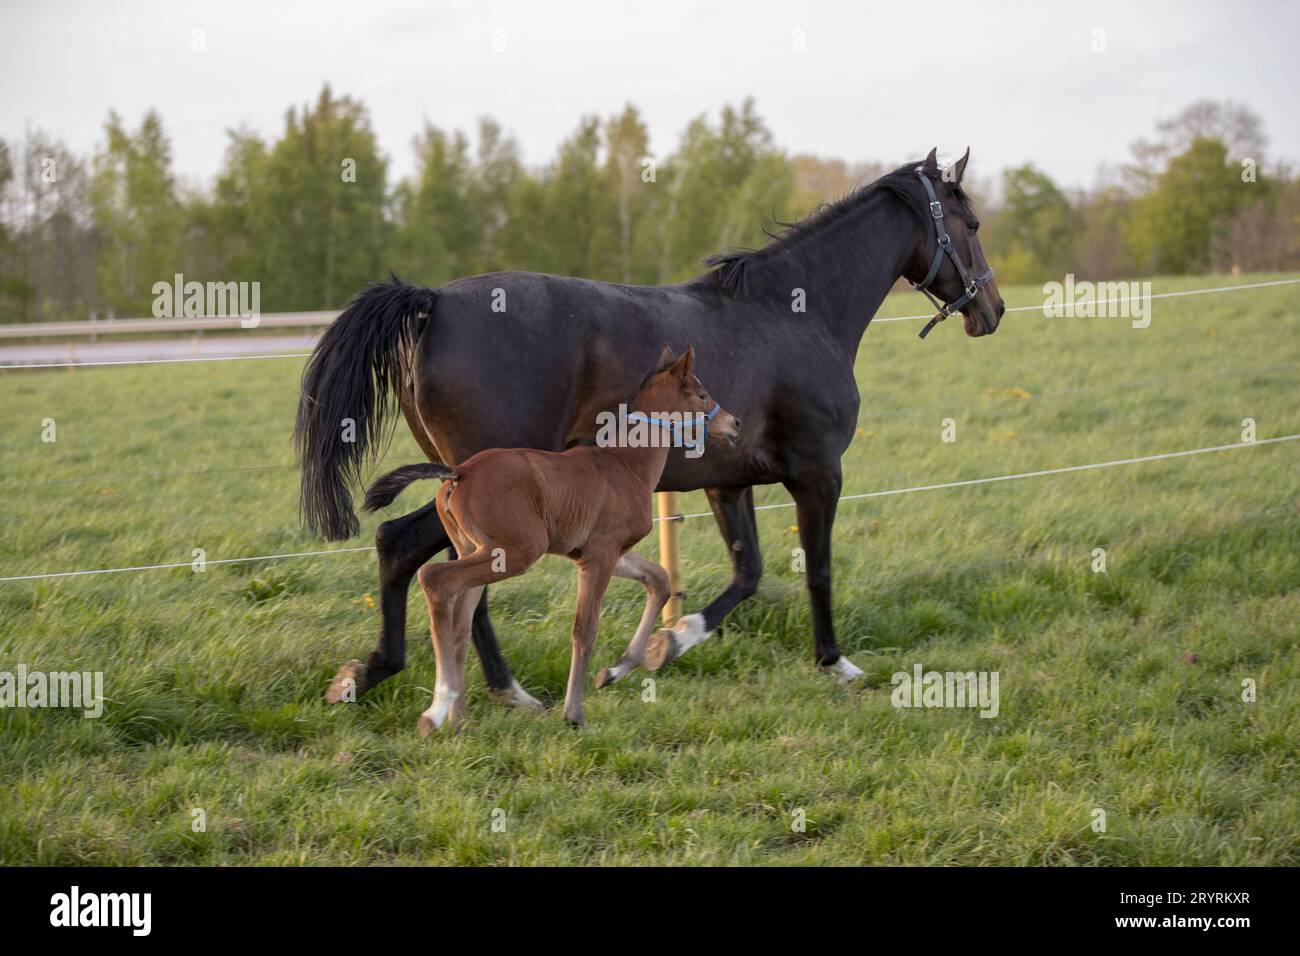 A mother horse and her foal saunter through a lush, green meadow on a beautiful day Stock Photo